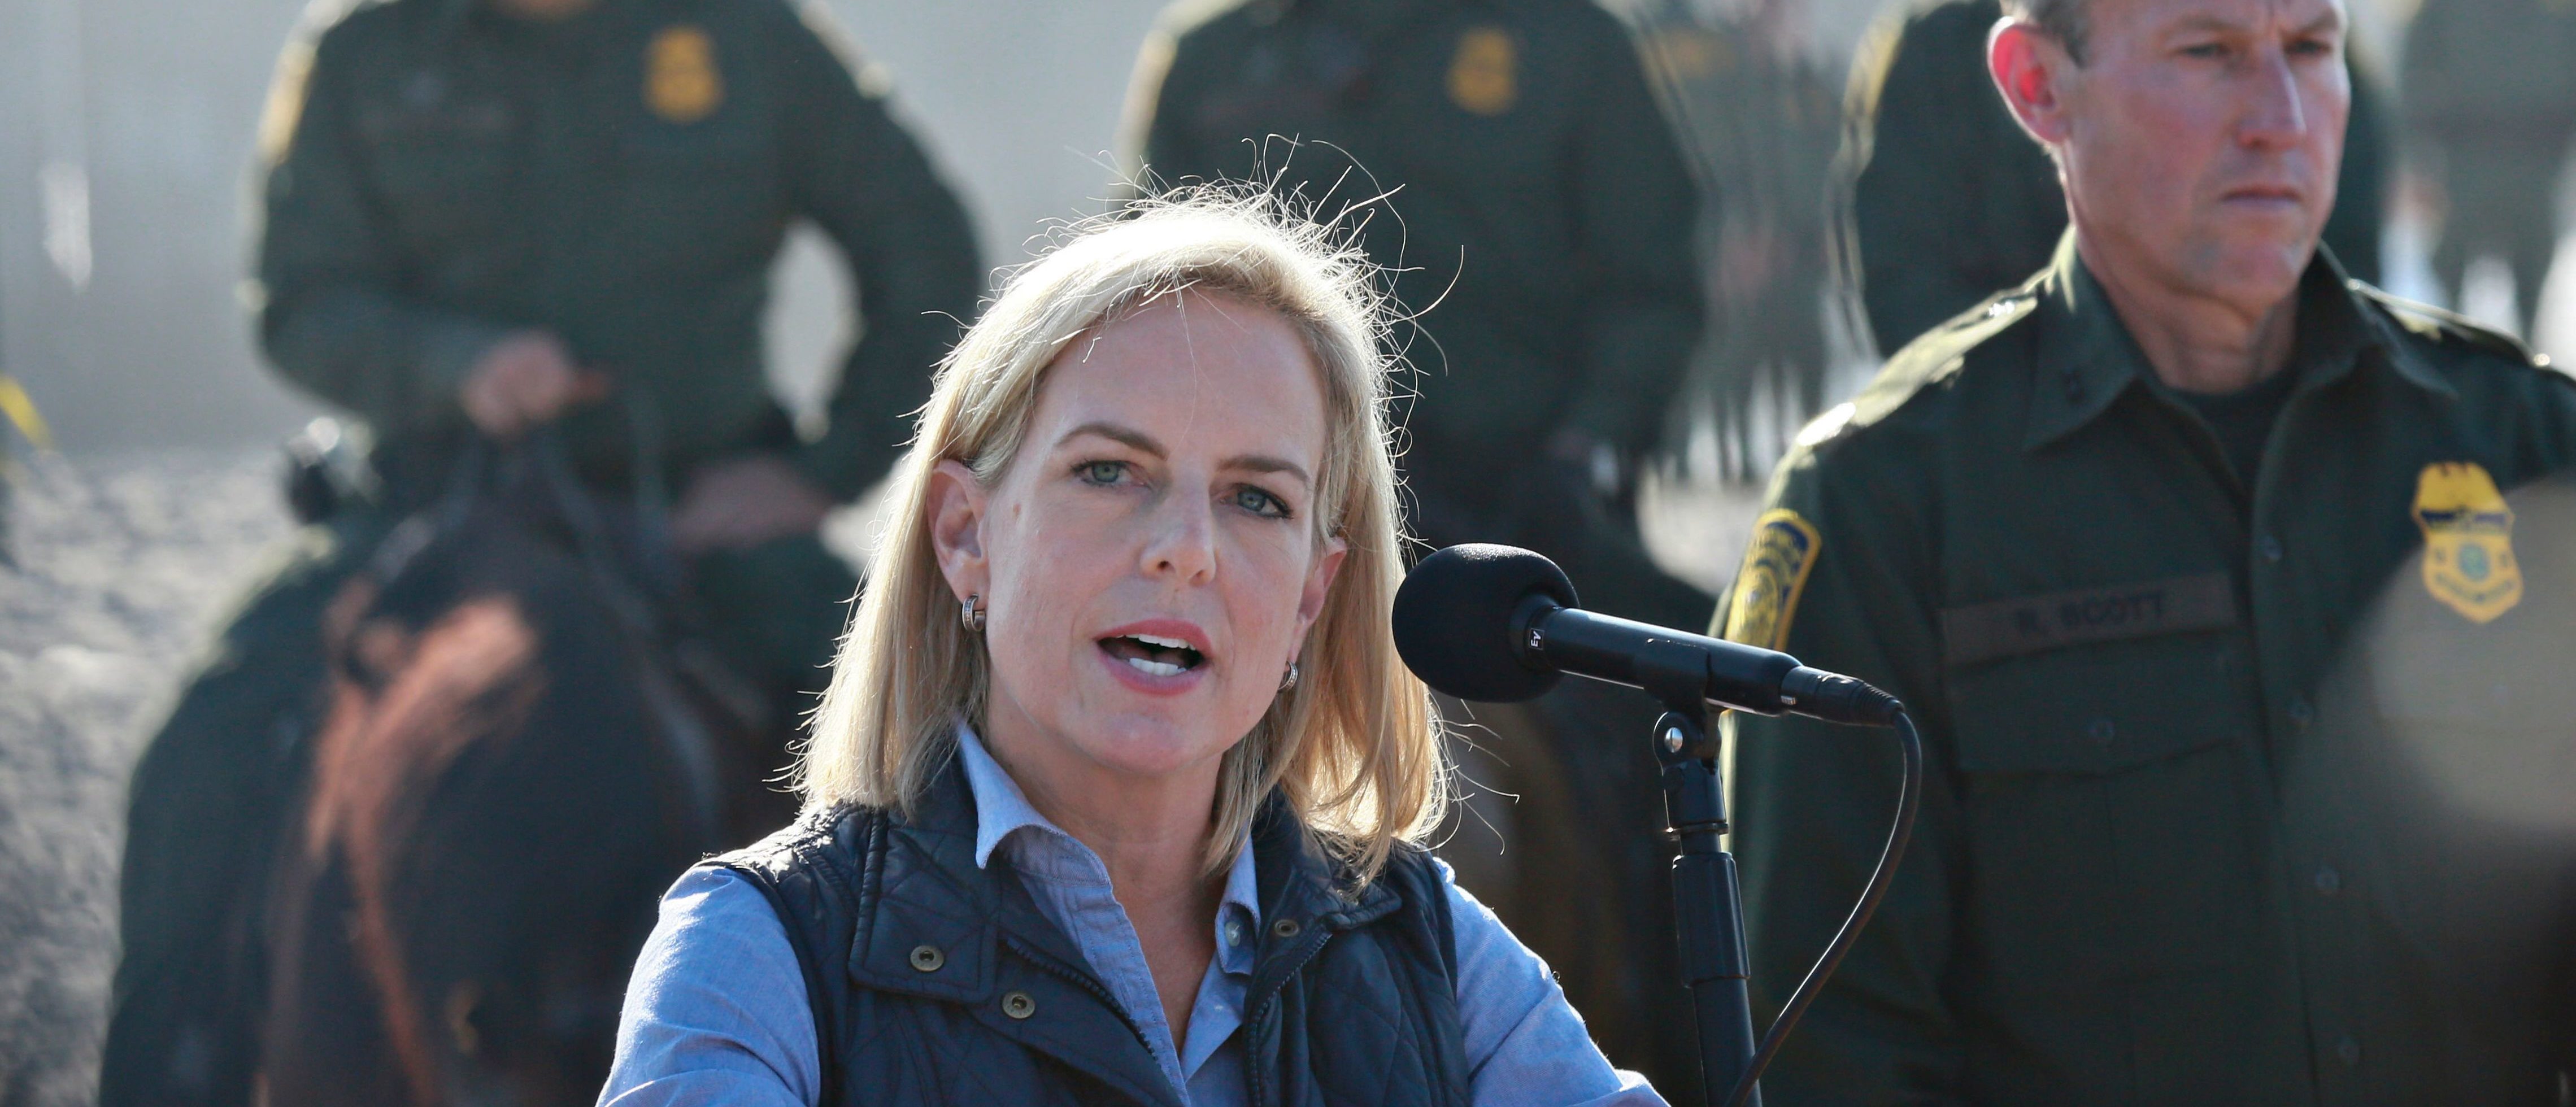 Kirstjen M. Nielsen, Secretary of the Department of Homeland Security, speaks to reporters during a press conference at Borderfield State Park along the United States-Mexico Border fence in San Ysidro, California on November 20, 2018. - A US federal judge temporarily blocked Donald Trump's administration from denying asylum to people who enter the country illegally, prompting the president to allege Tuesday that the court was biased against him. (Photo by Sandy Huffaker / AFP) (Photo credit should read SANDY HUFFAKER/AFP/Getty Images)